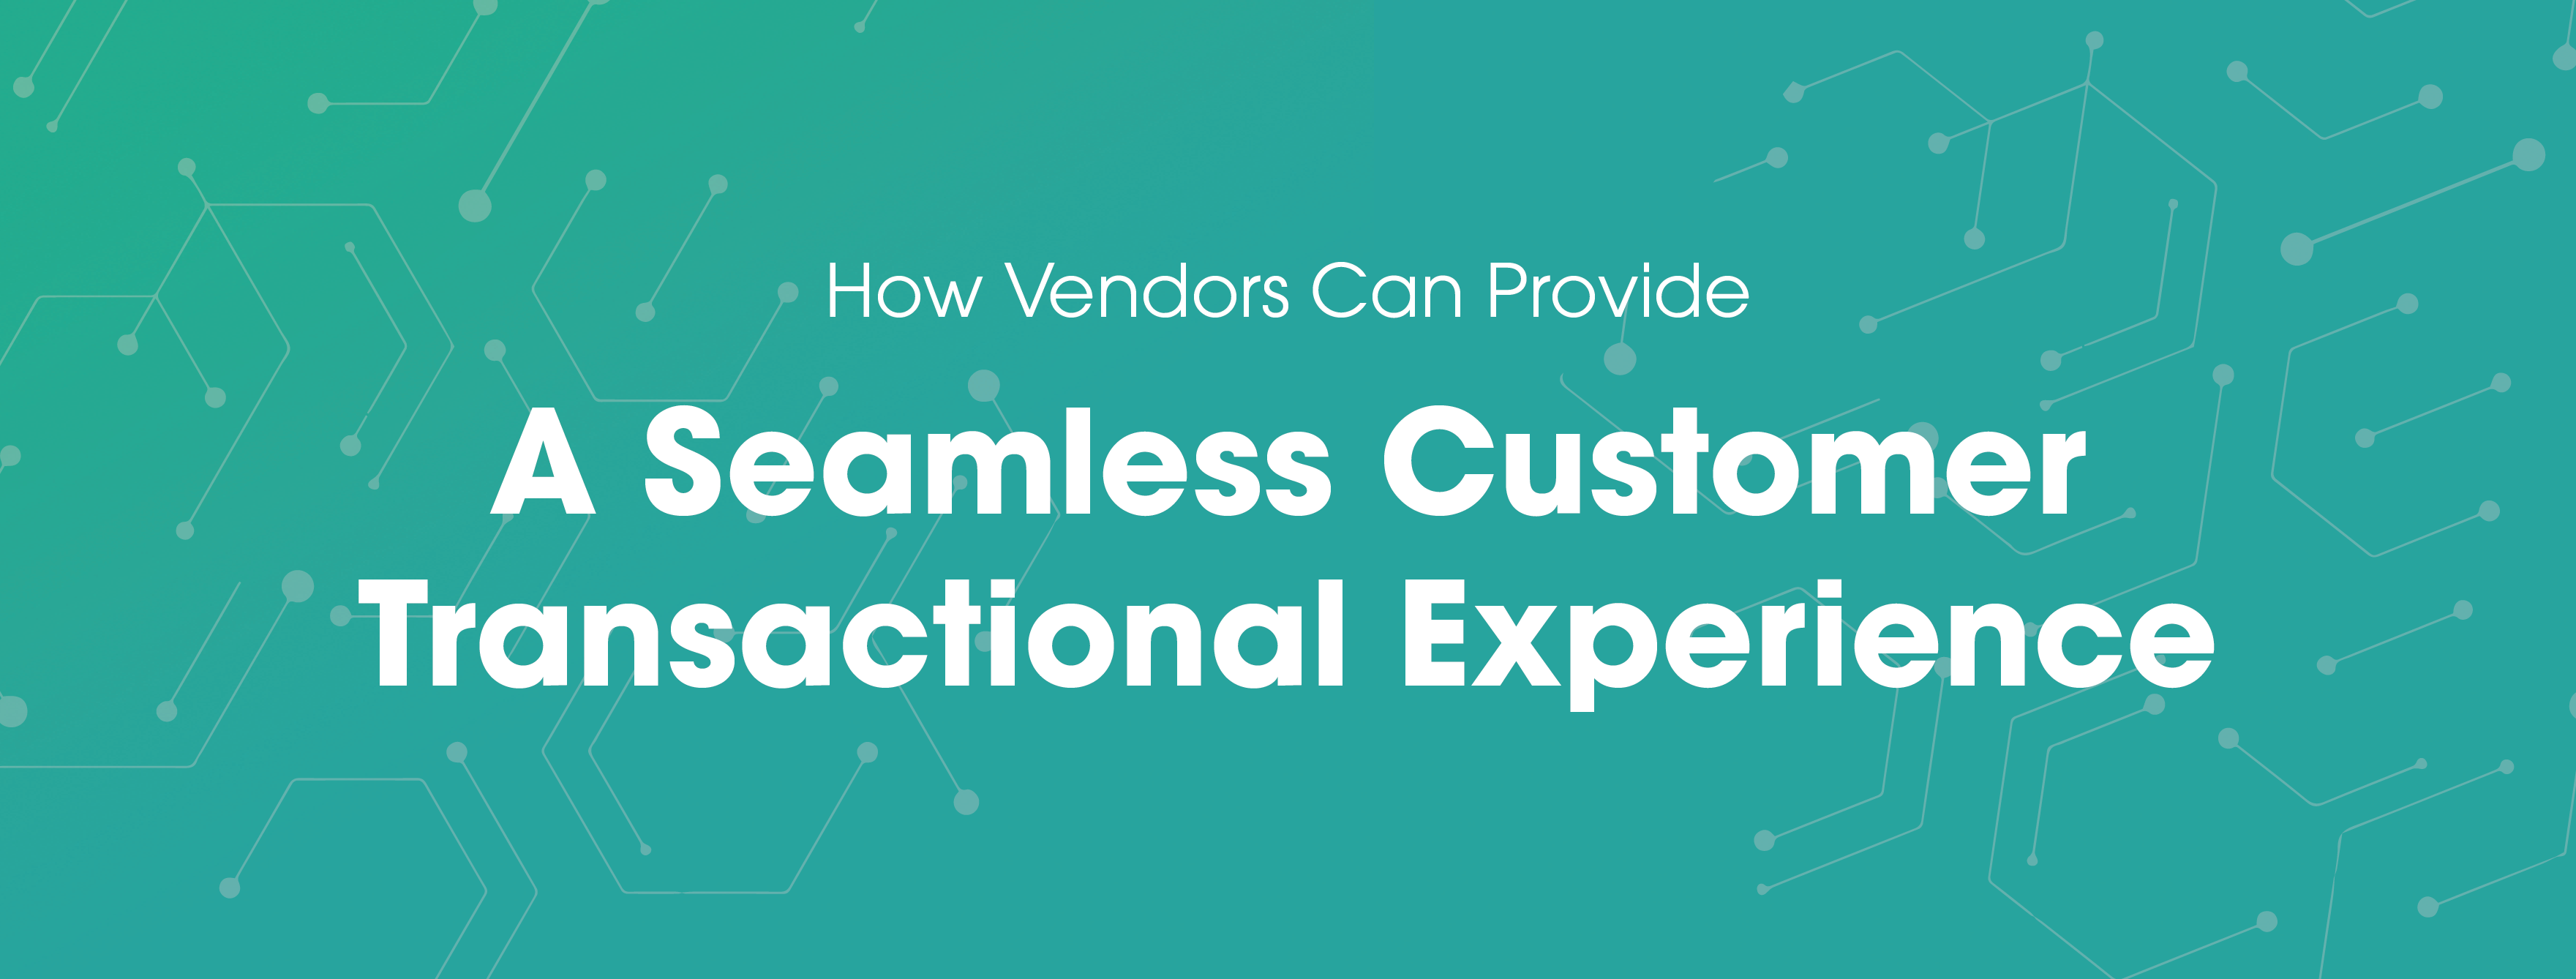 How vendors can provide a seamless customer transactional experience